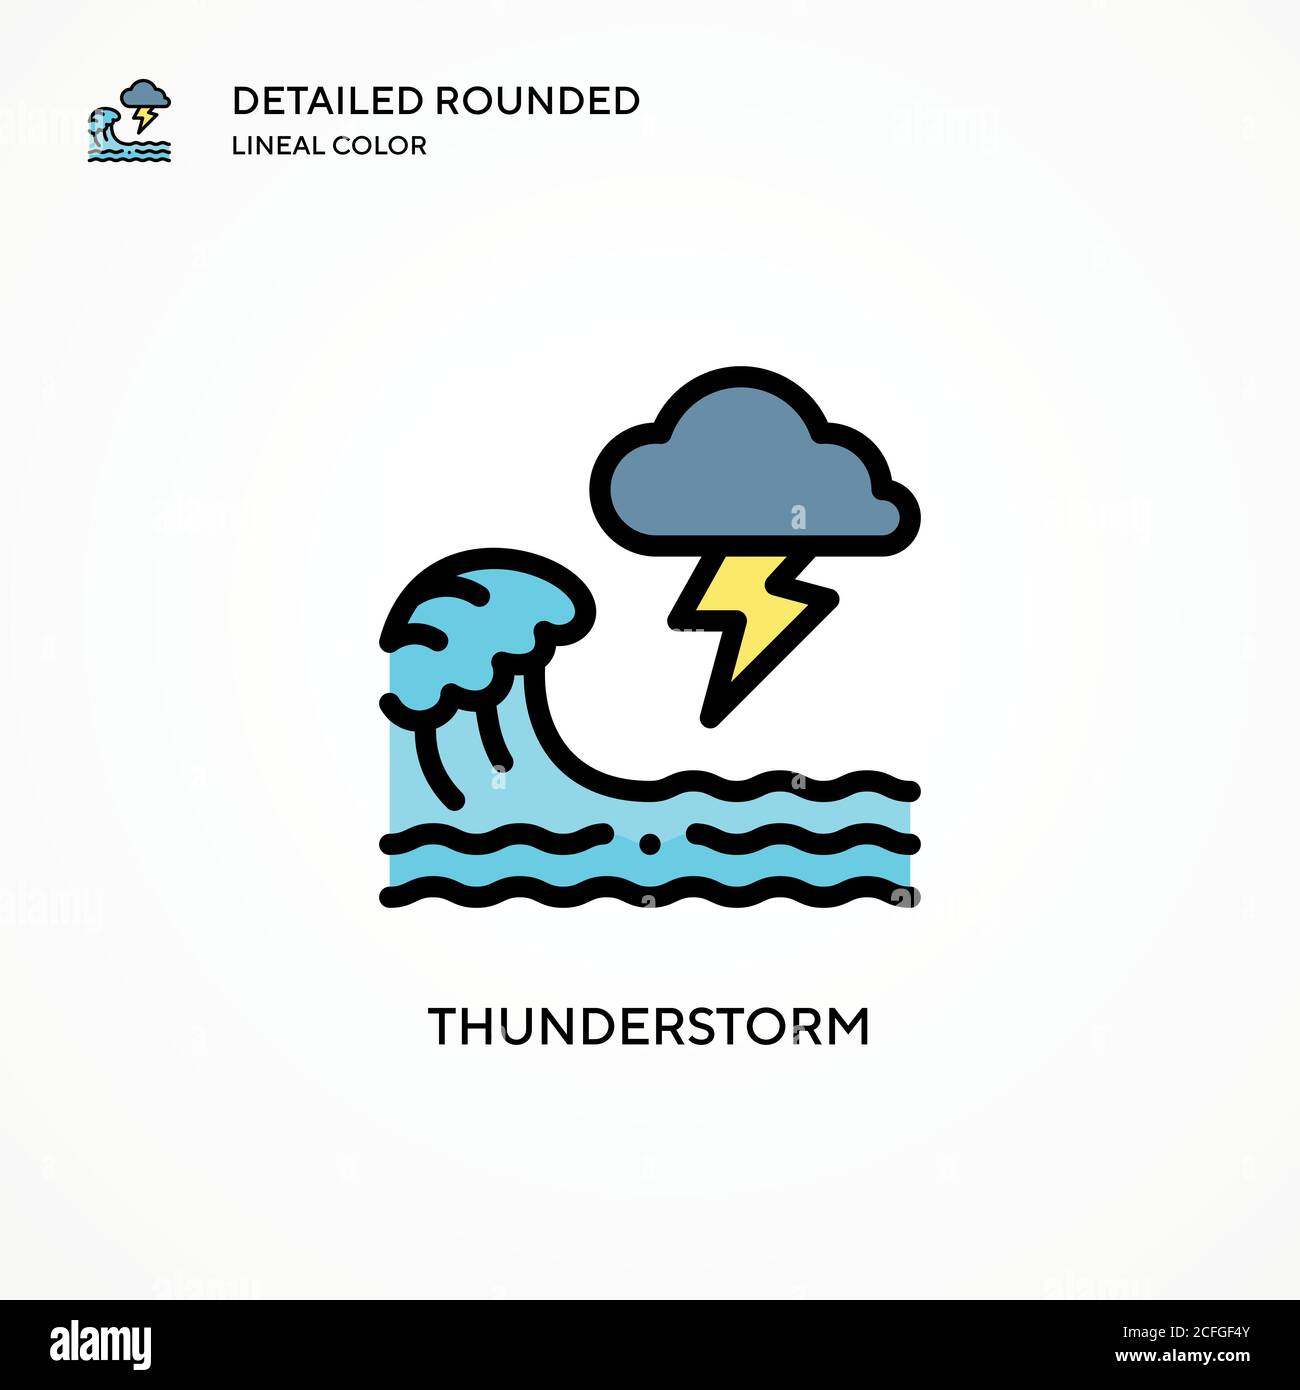 Thunderstorm vector icon. Modern vector illustration concepts. Easy to edit and customize. Stock Vector